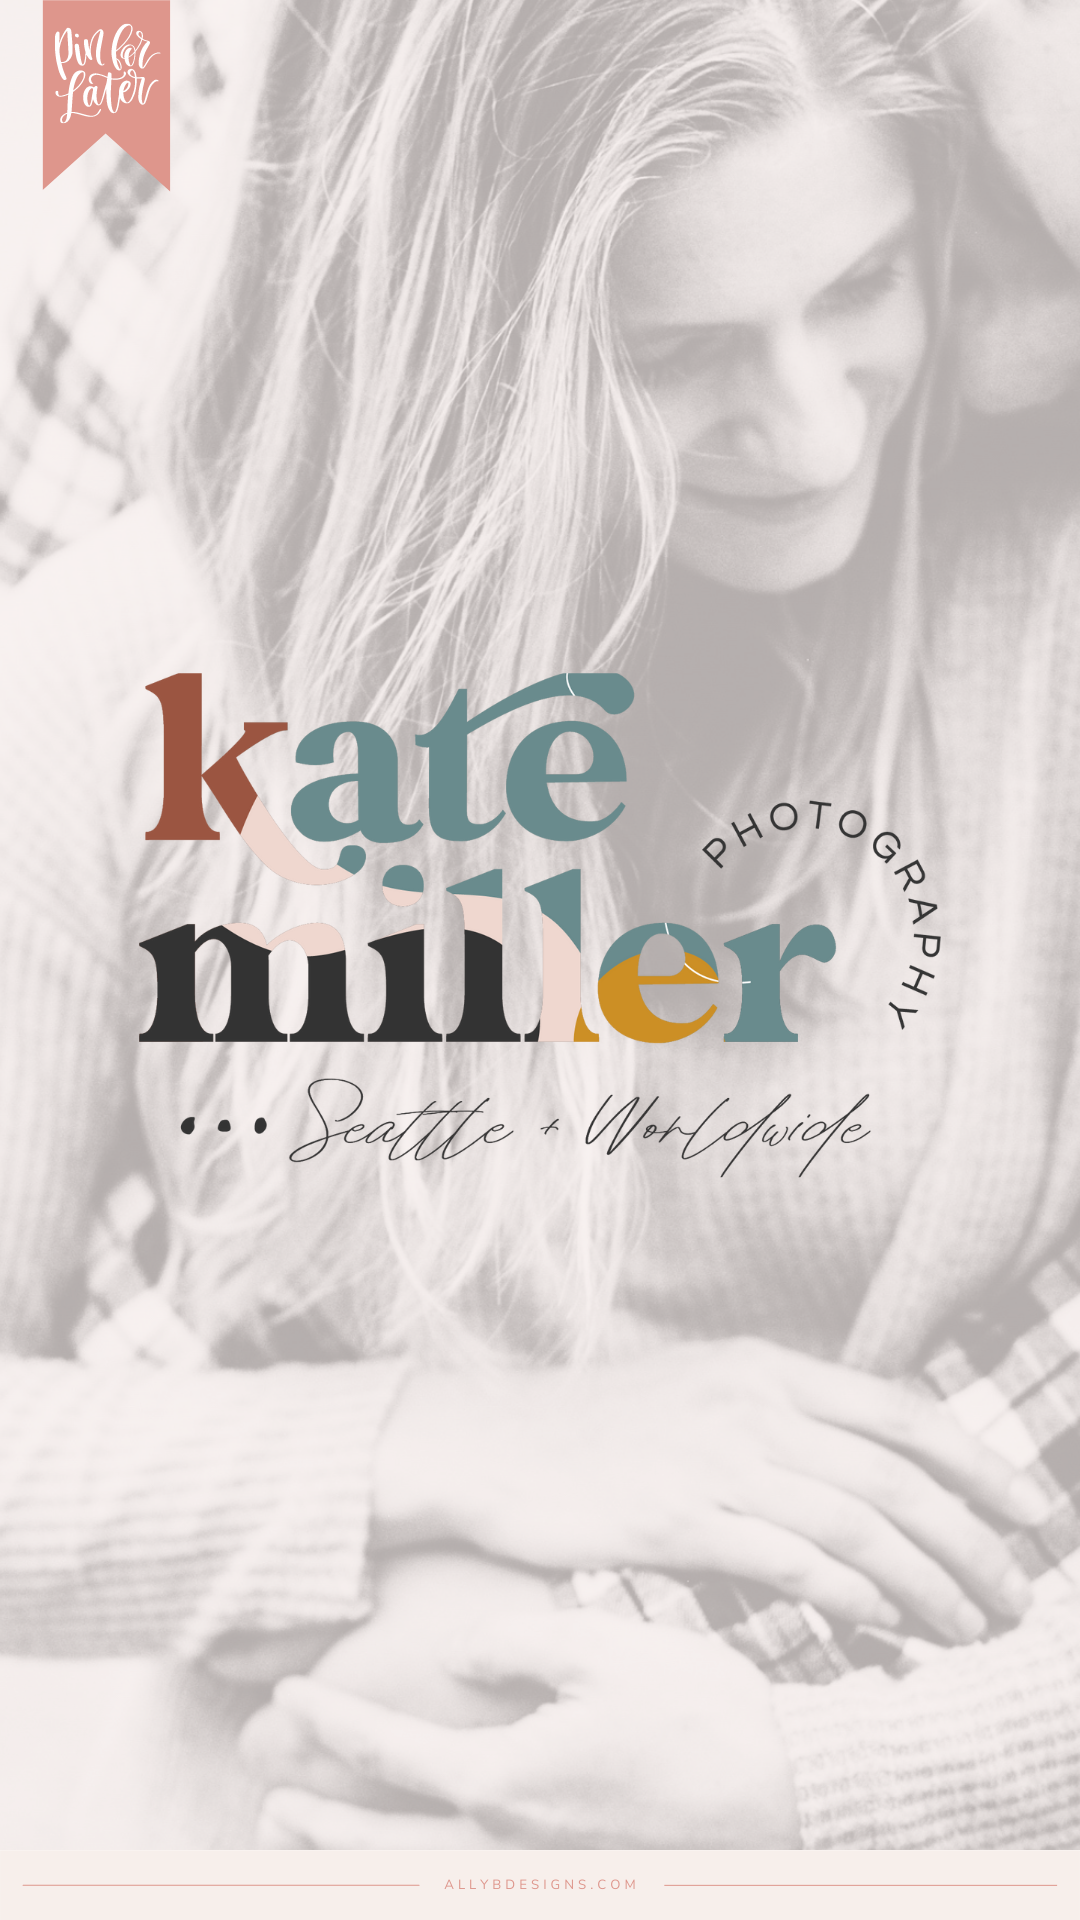 Client Launch: A Wedding Photographer Website and Brand for Kate Miller Photography by Ally B Designs